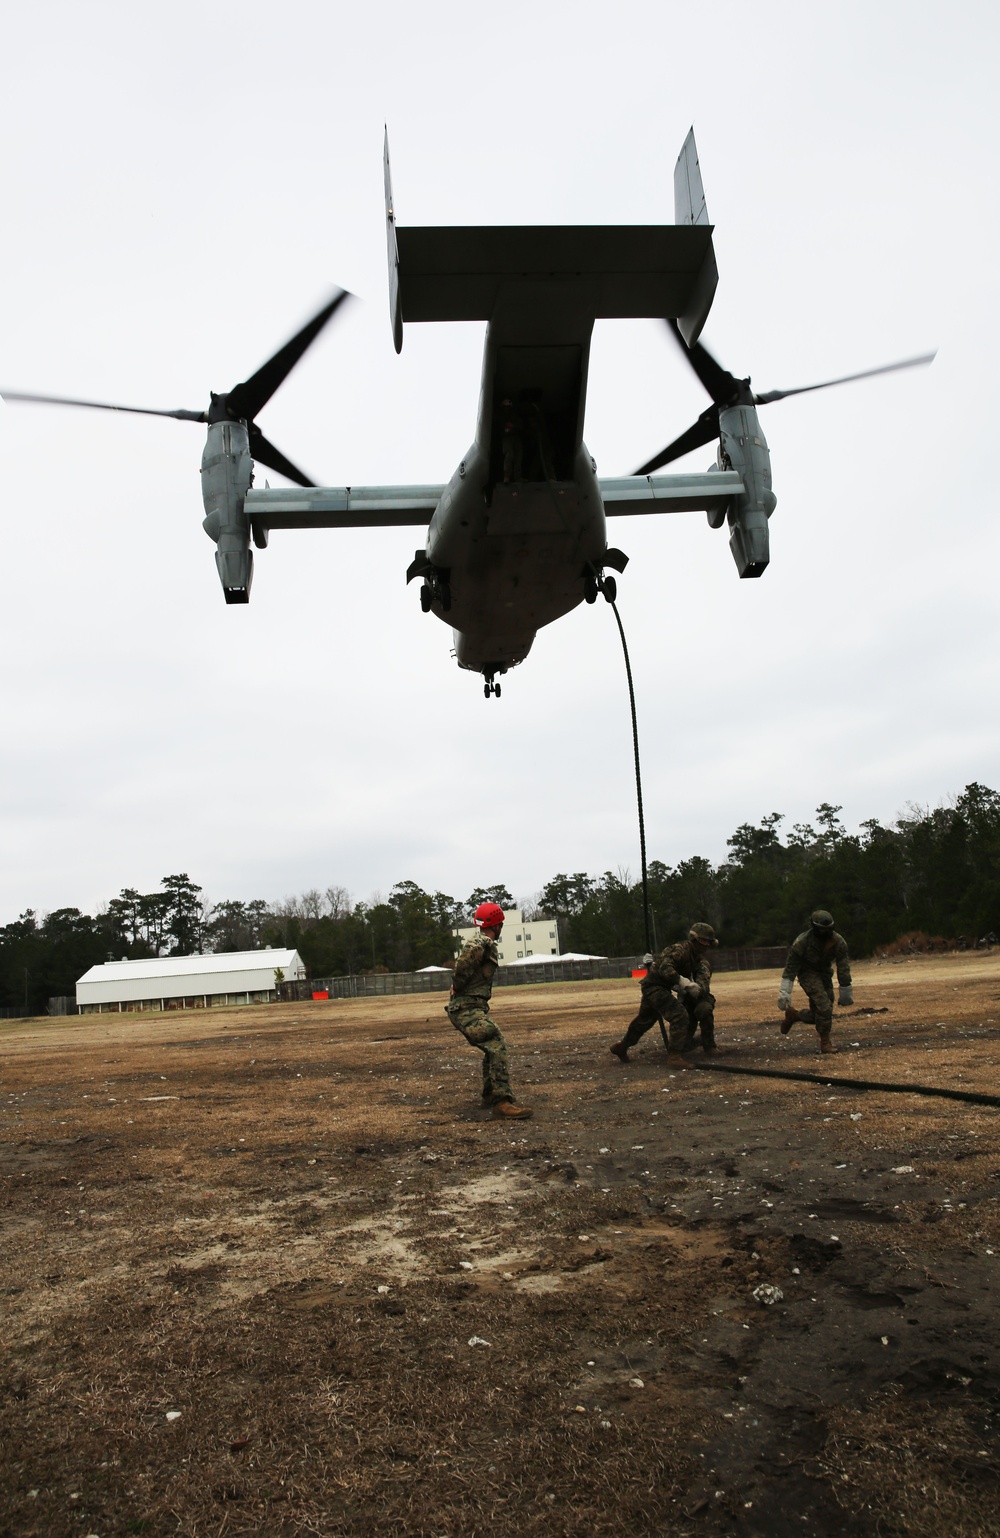 HRST Instructors set example and lead Marines by ropes